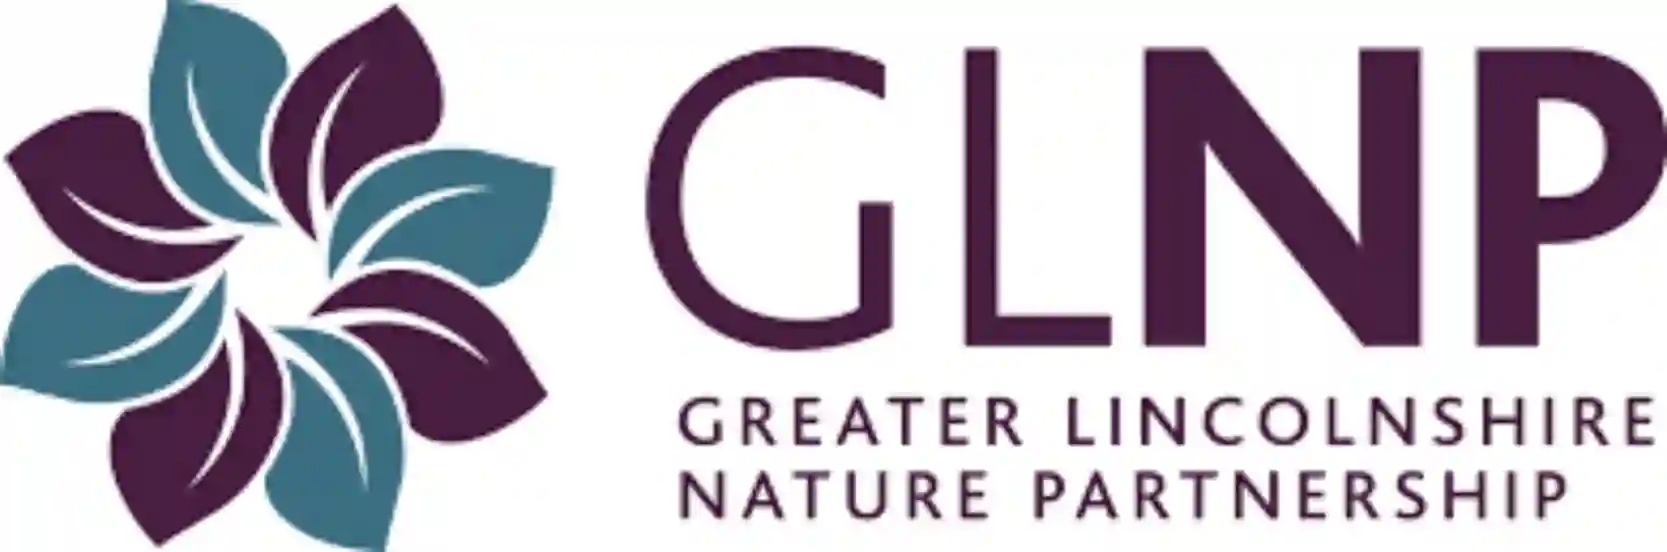 Greater Lincolnshire Nature Partnership Logo